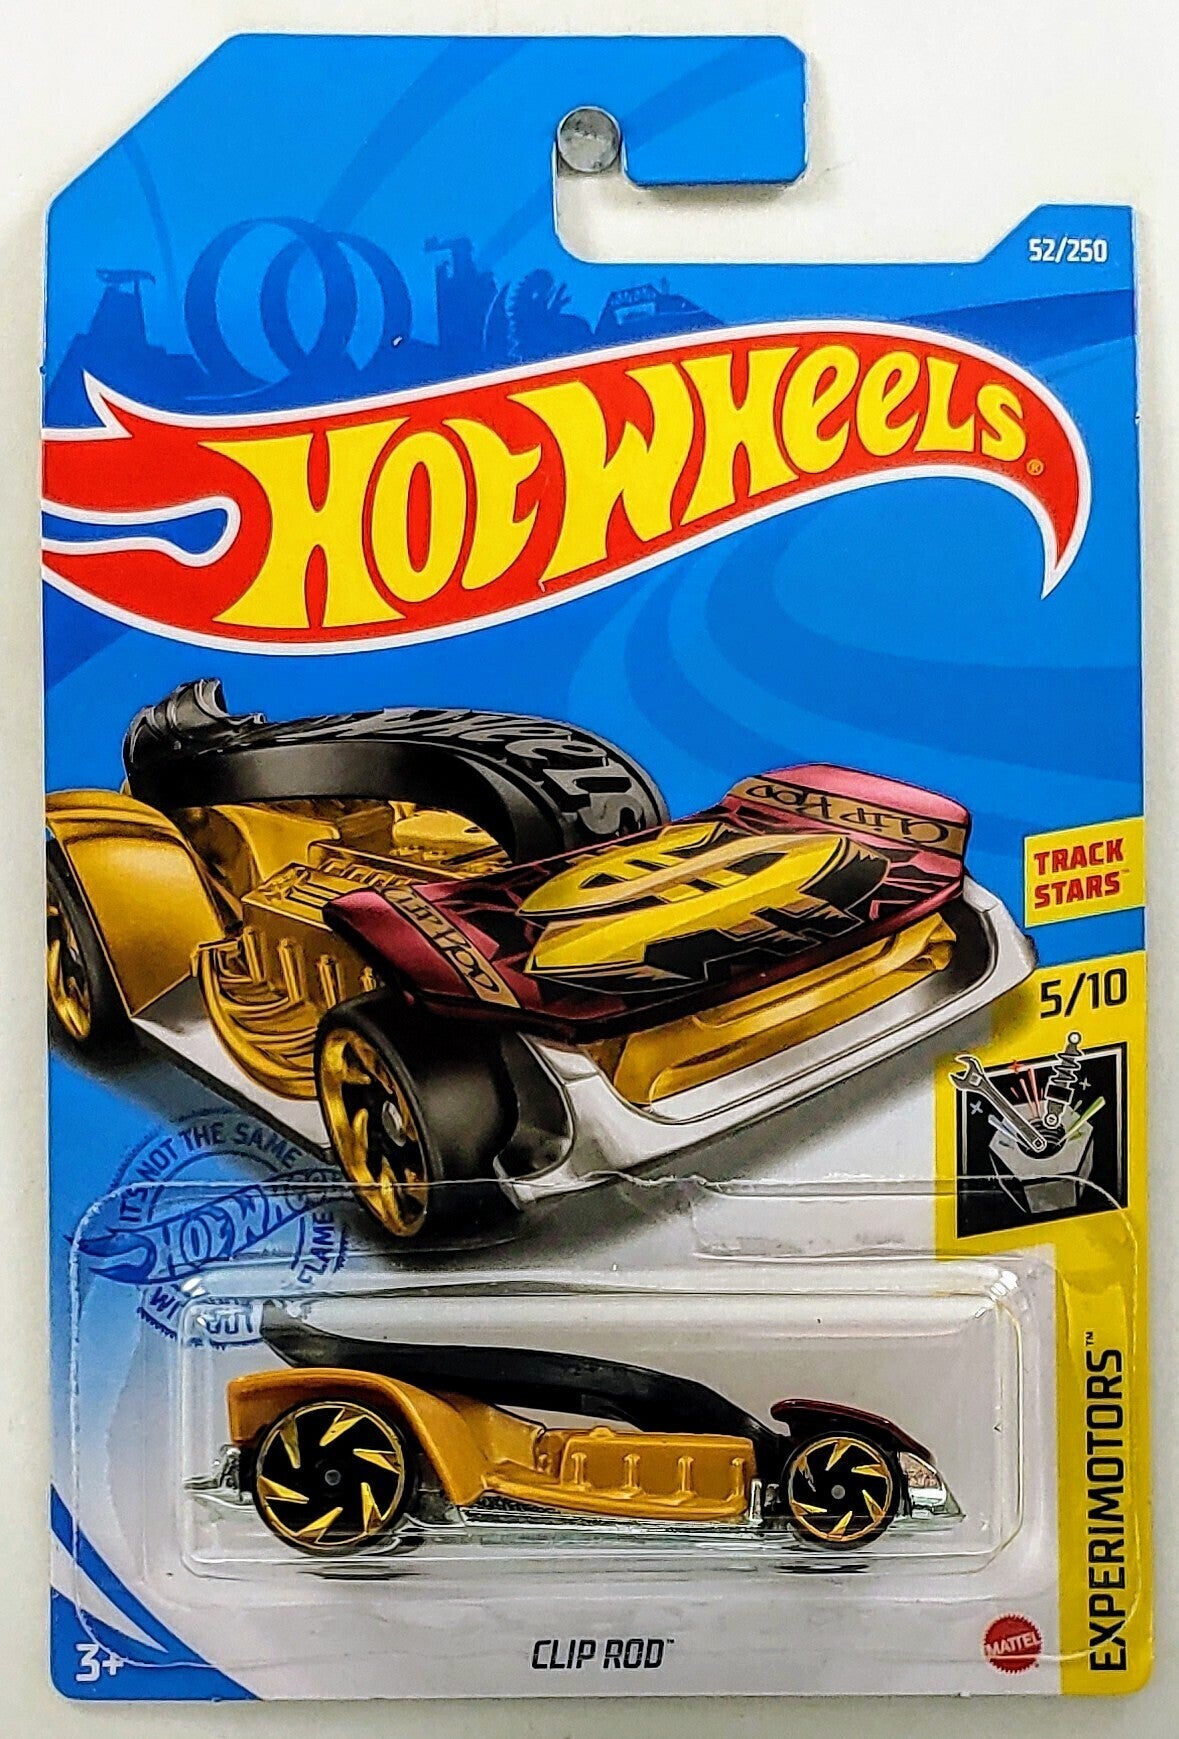 Hot Wheels 2021 - Collector # 052/250 - Experimotors 5/10 - Clip Rod - Black, Dark Red & Gold - IC